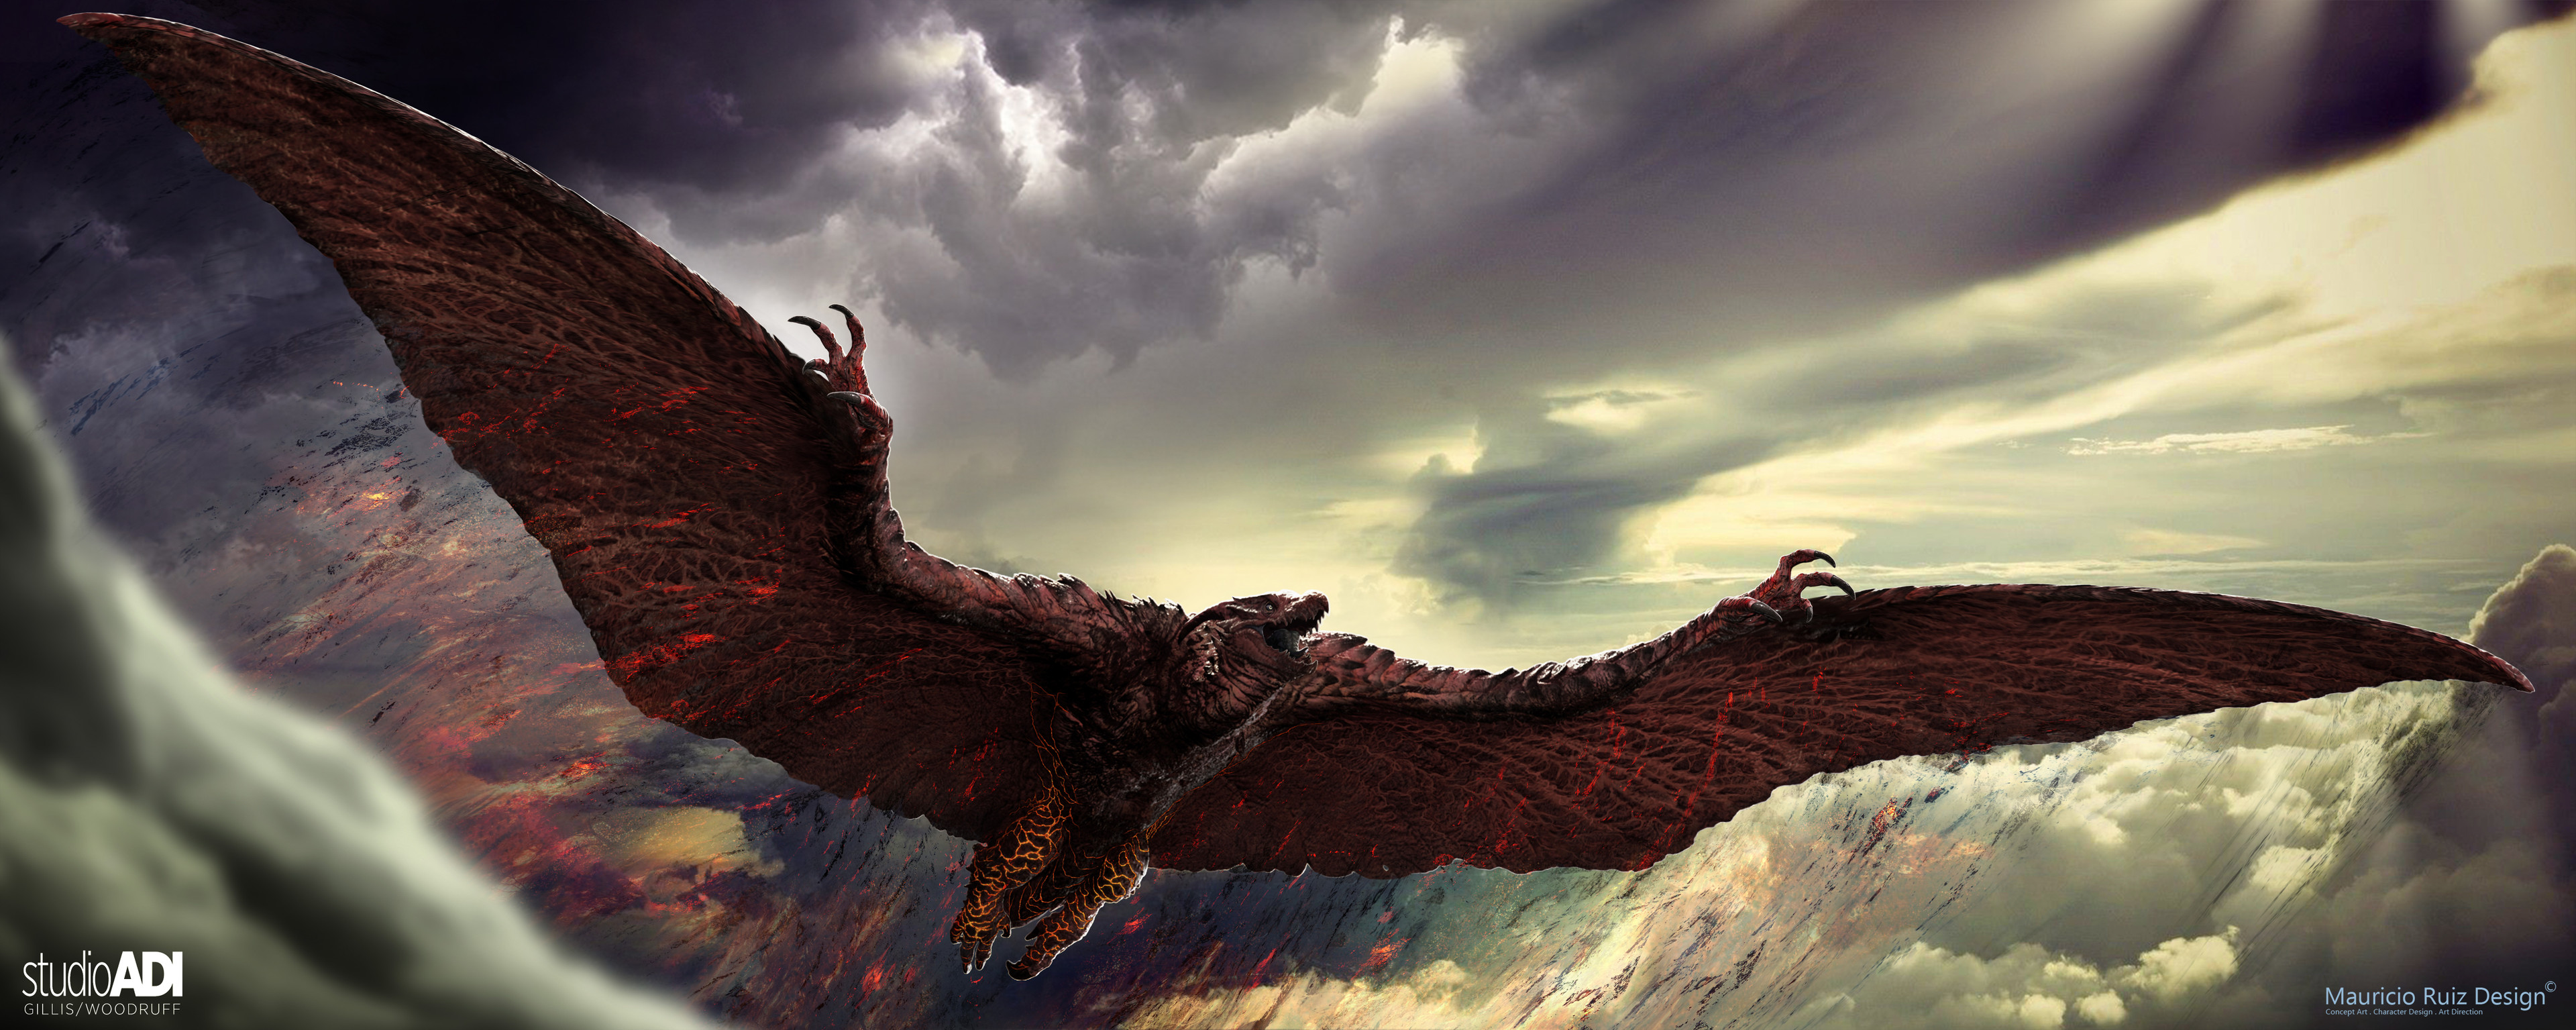 One of the final Rodan Concepts I created. I started with a 3D Render out of Keyshot, then painted the wing textures in Photoshop. This version had a more streamlined wing profile and explored the lava accumulated on the legs.